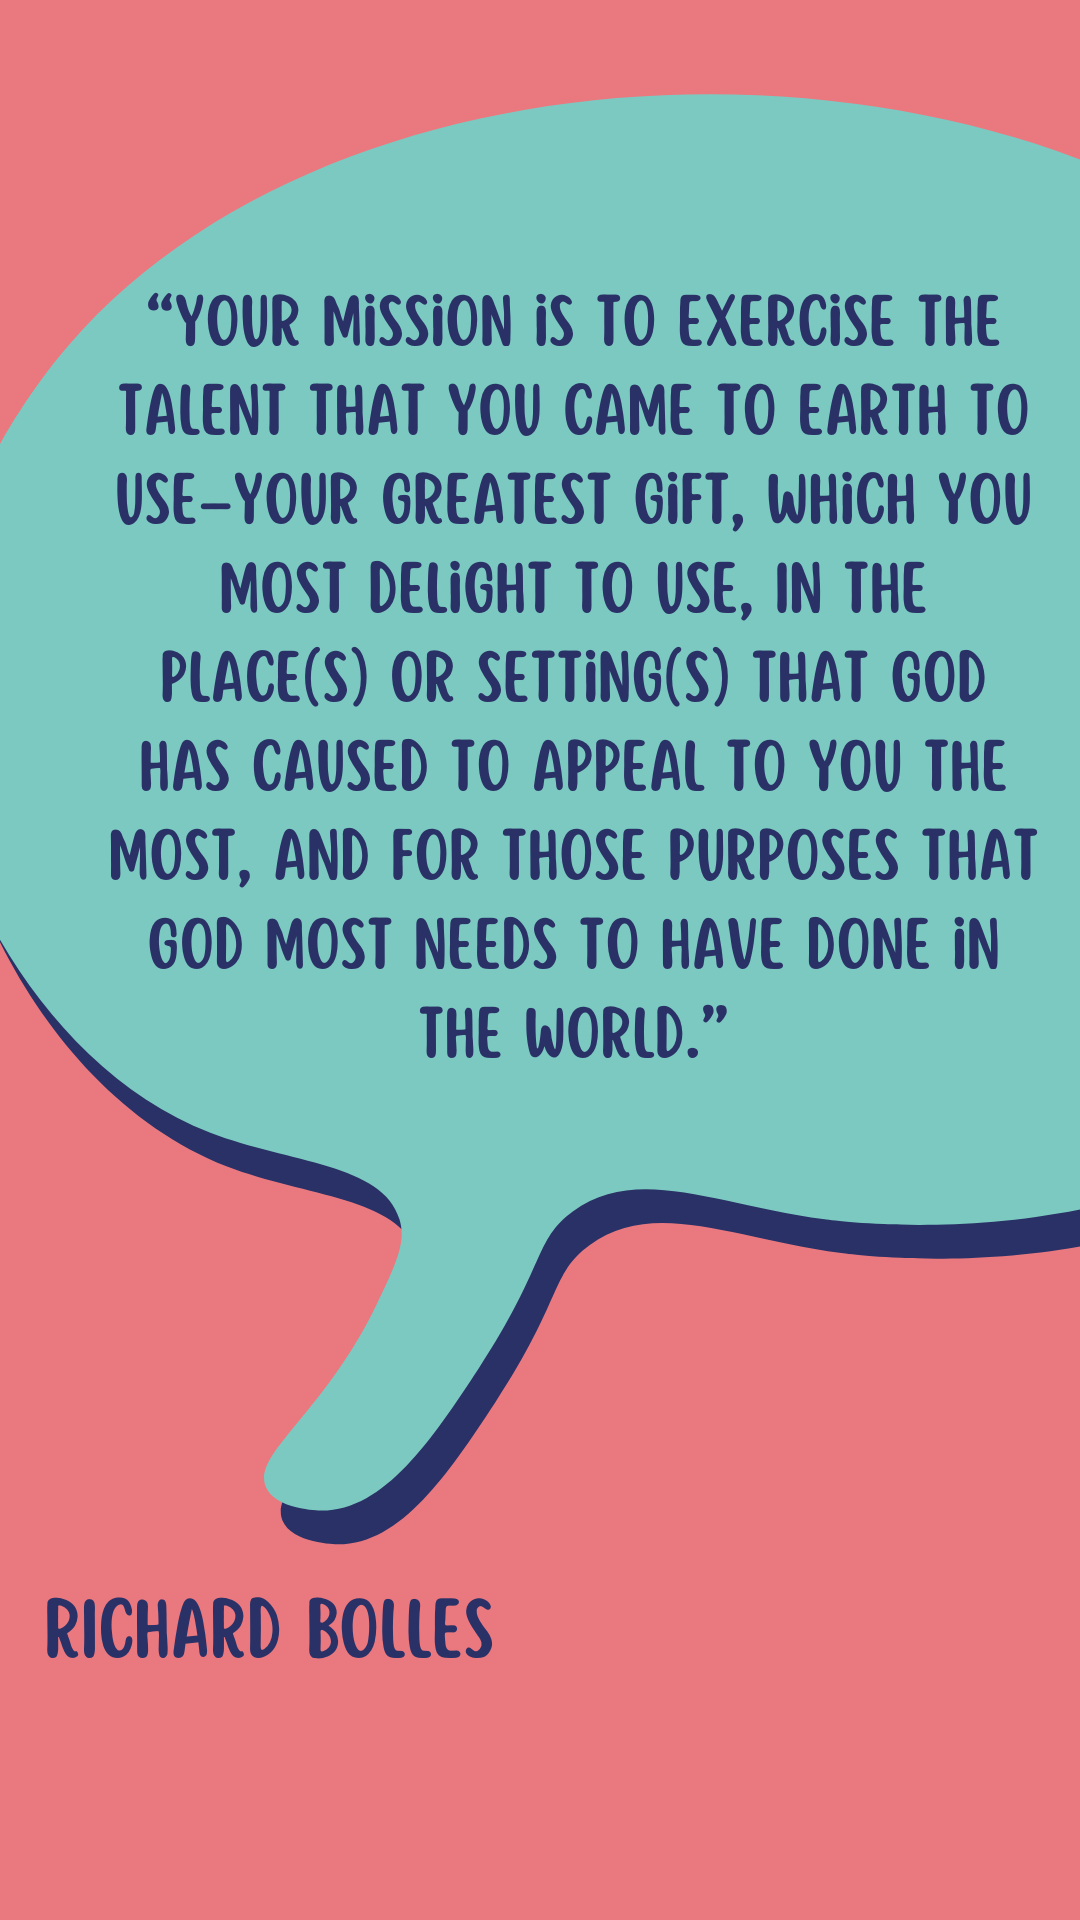 According to Richard Bolles, “Your mission is to exercise the Talent that you came to earth to use–your greatest gift, which you most delight to use, In the place(s) or setting(s) that God has caused to appeal to you the most, and for those purposes that God most needs to have done in the world.”